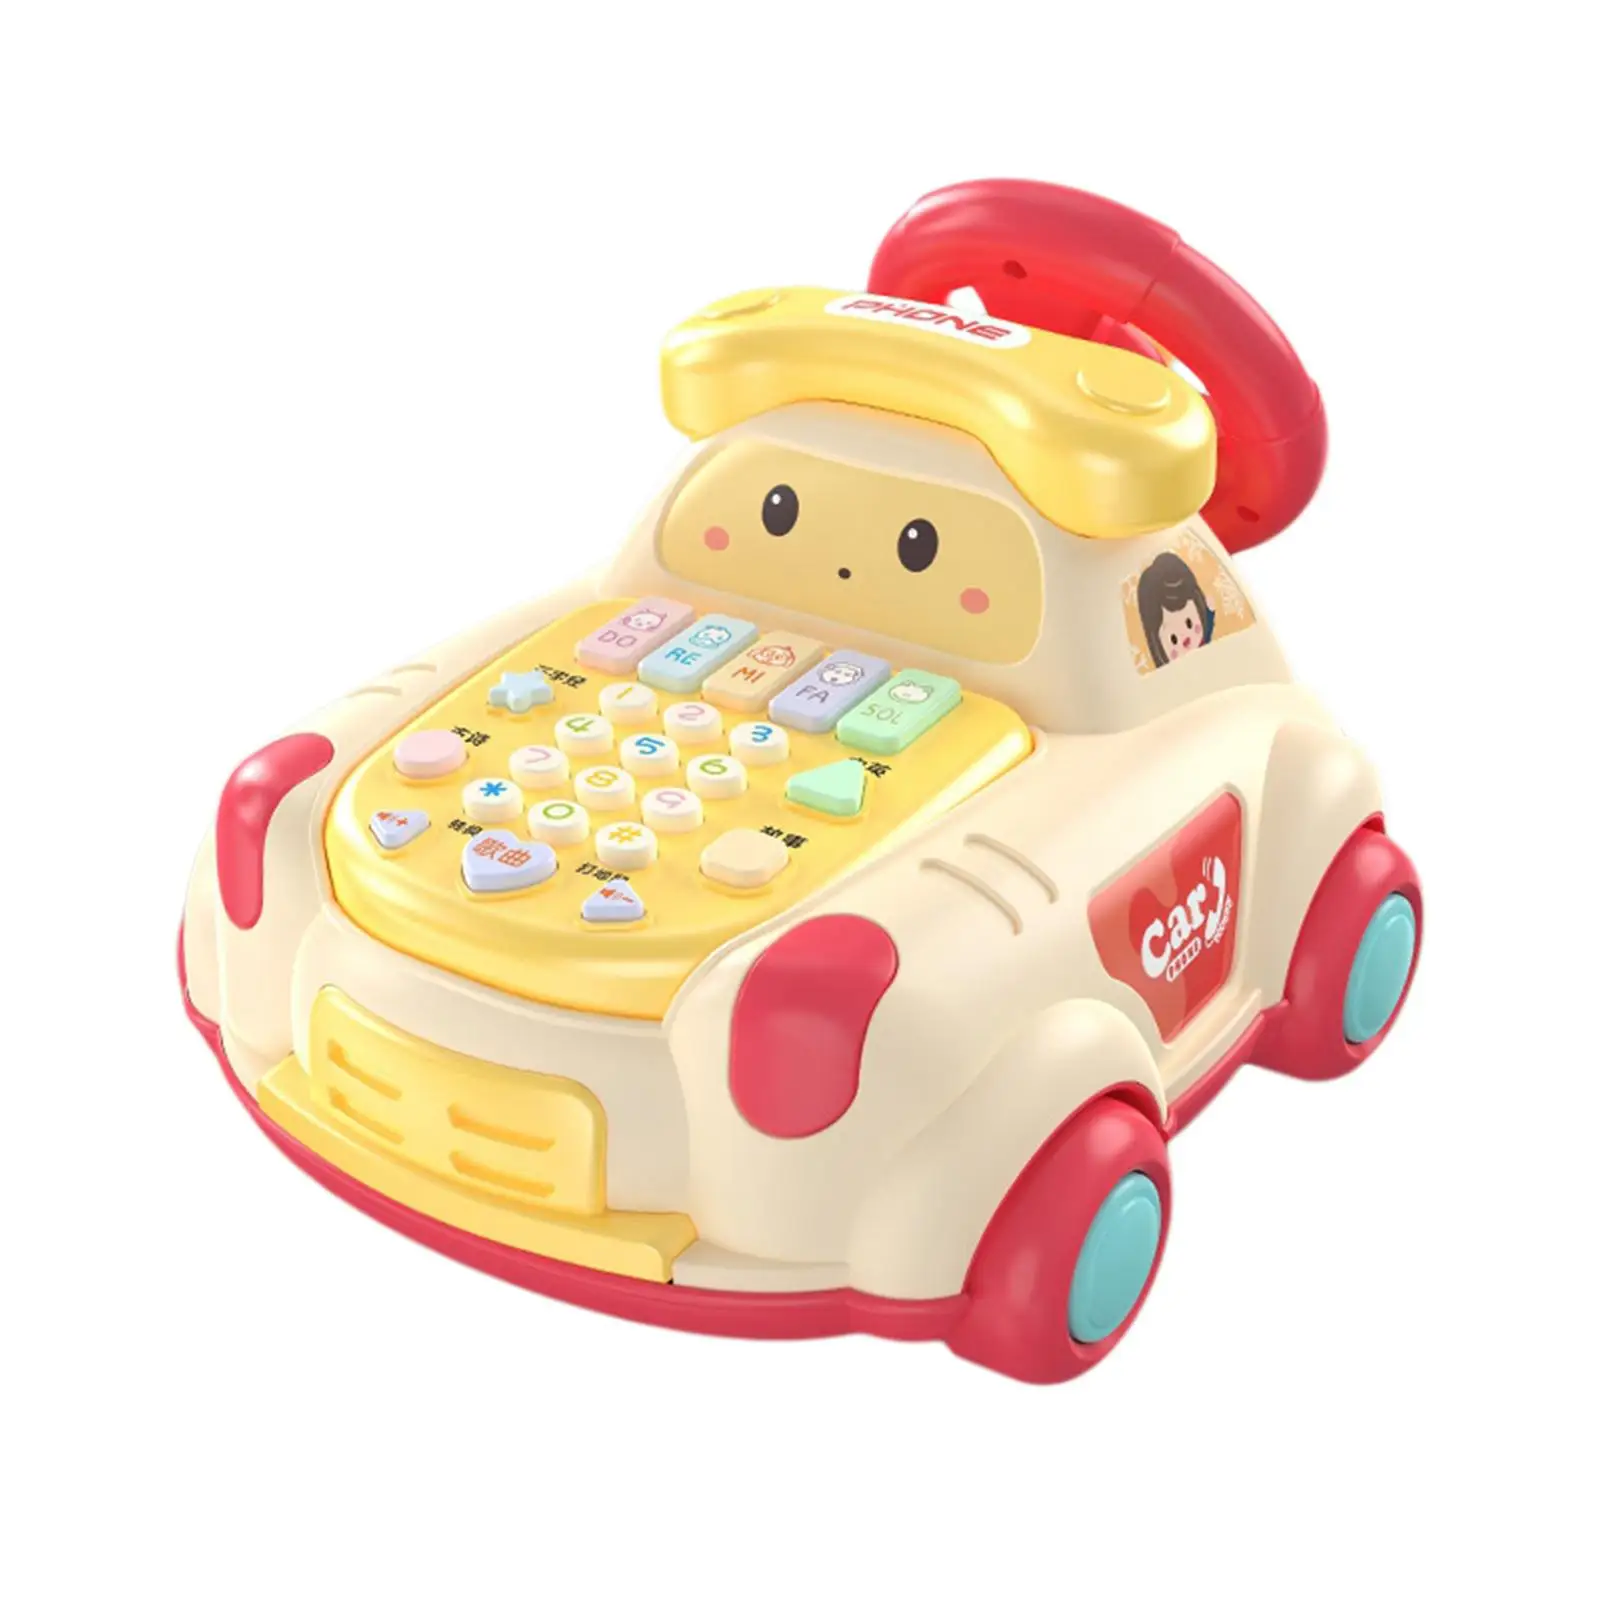 toddlers Steering Wheel music Light Phone Toy for Game Activity Learning